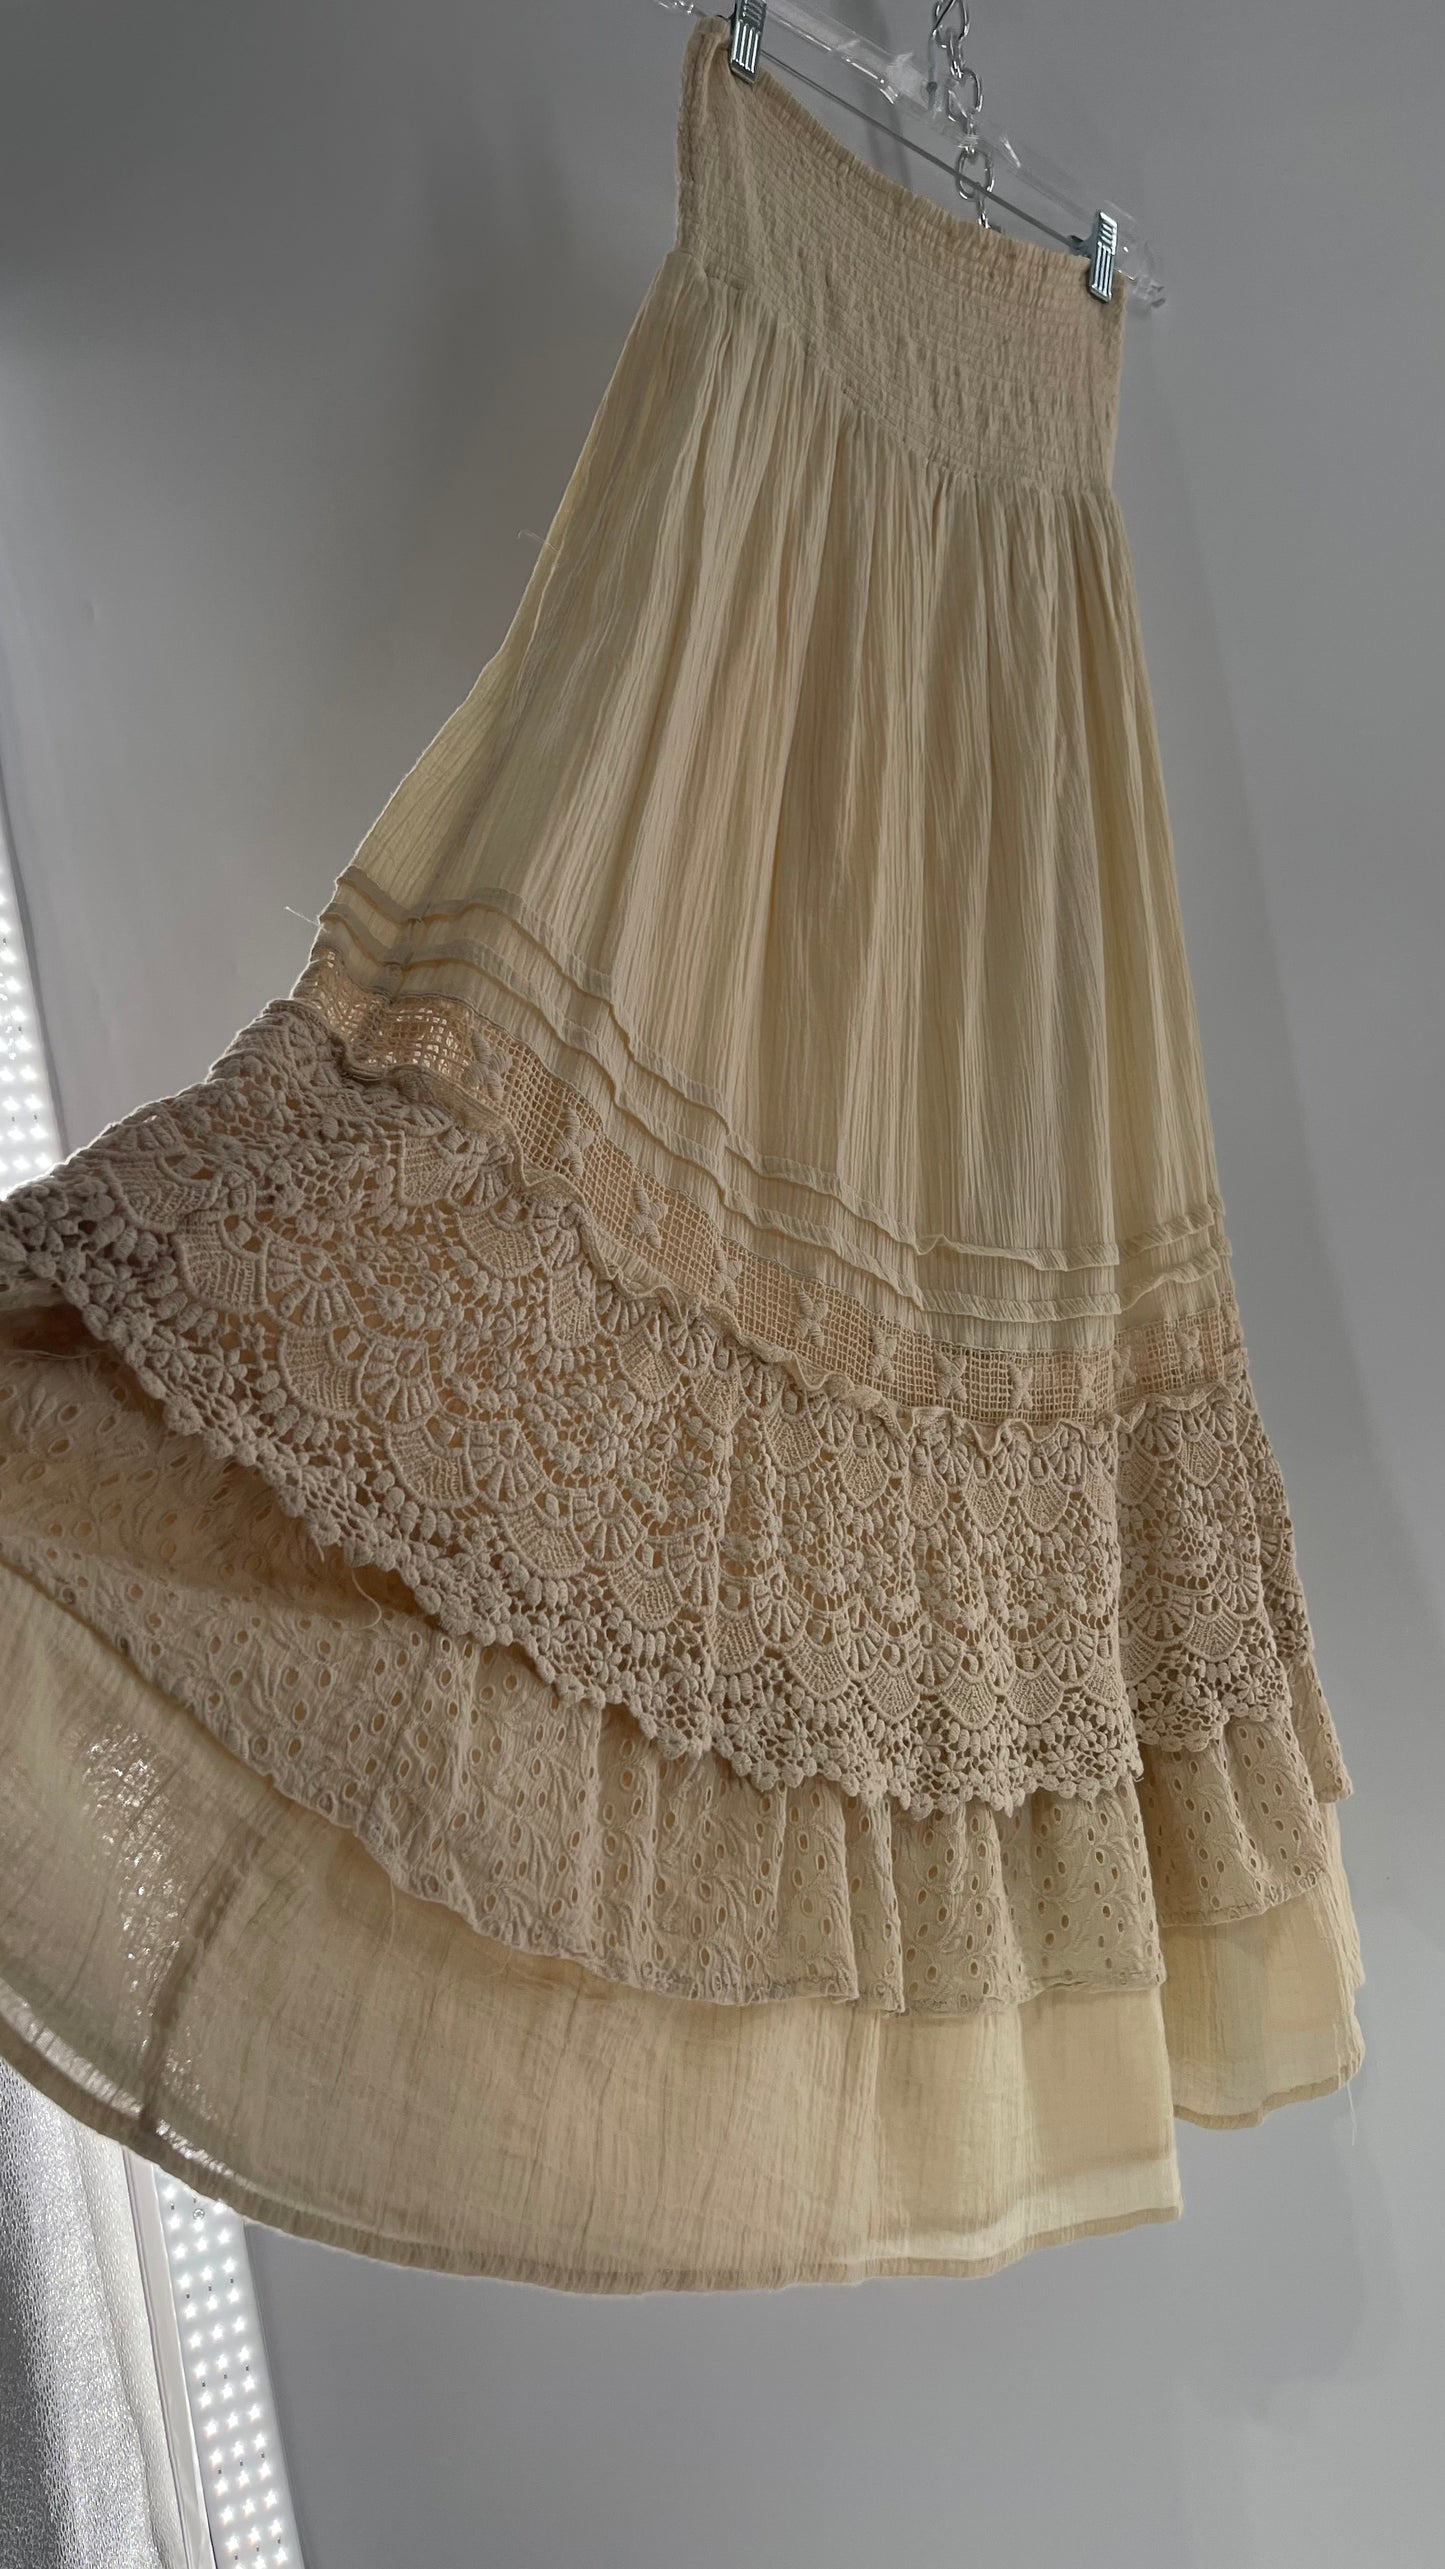 Free People Beige Gauze/Cotton Full Length Skirt Lined with Lace  (XS)